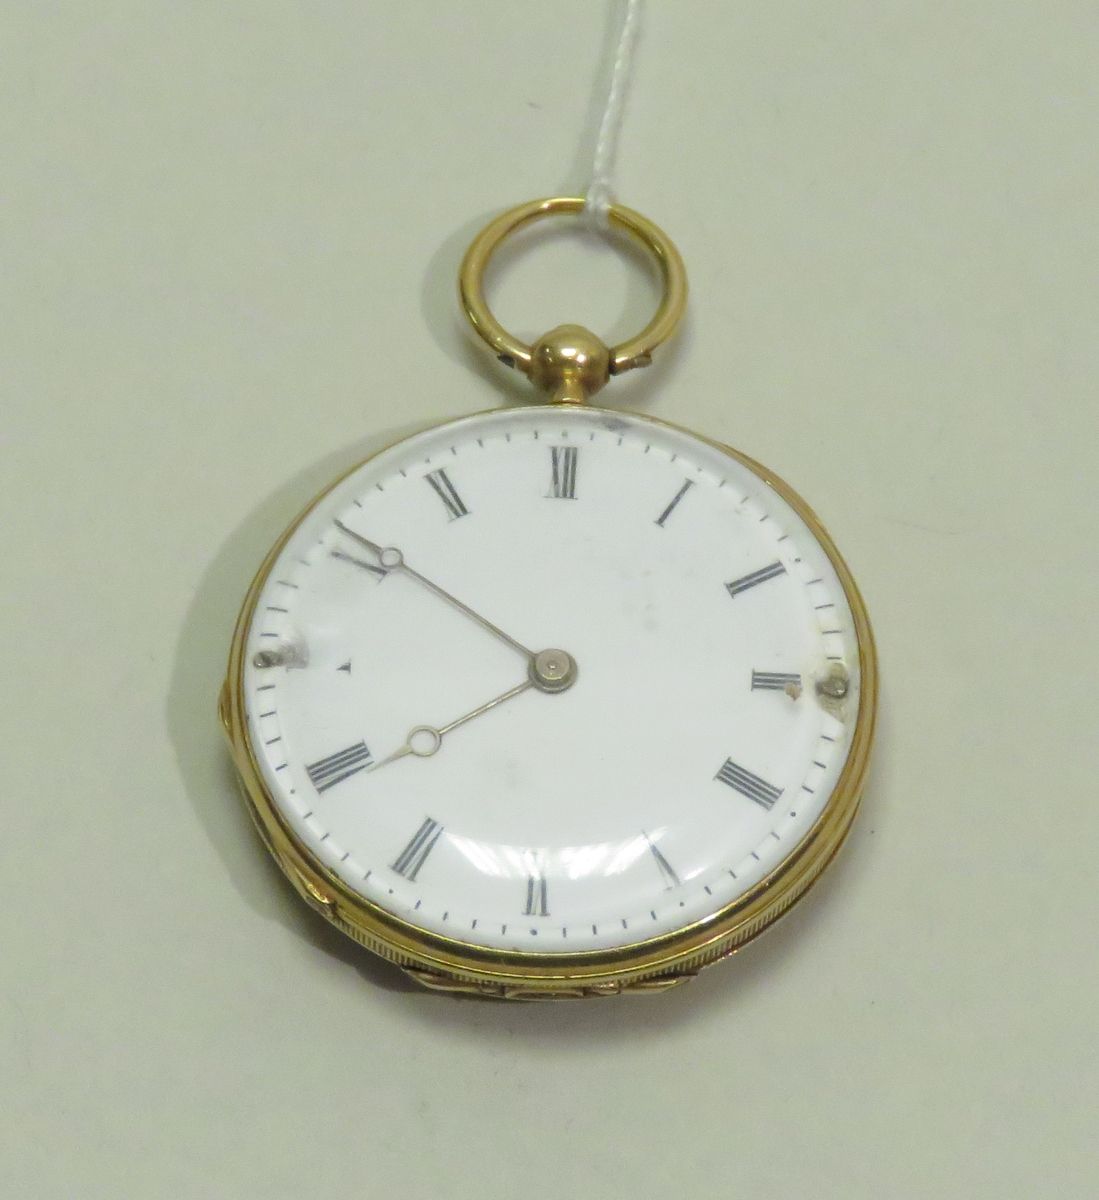 Null Gold and enamel collar watch. Gross weight: 17g65. (damaged).